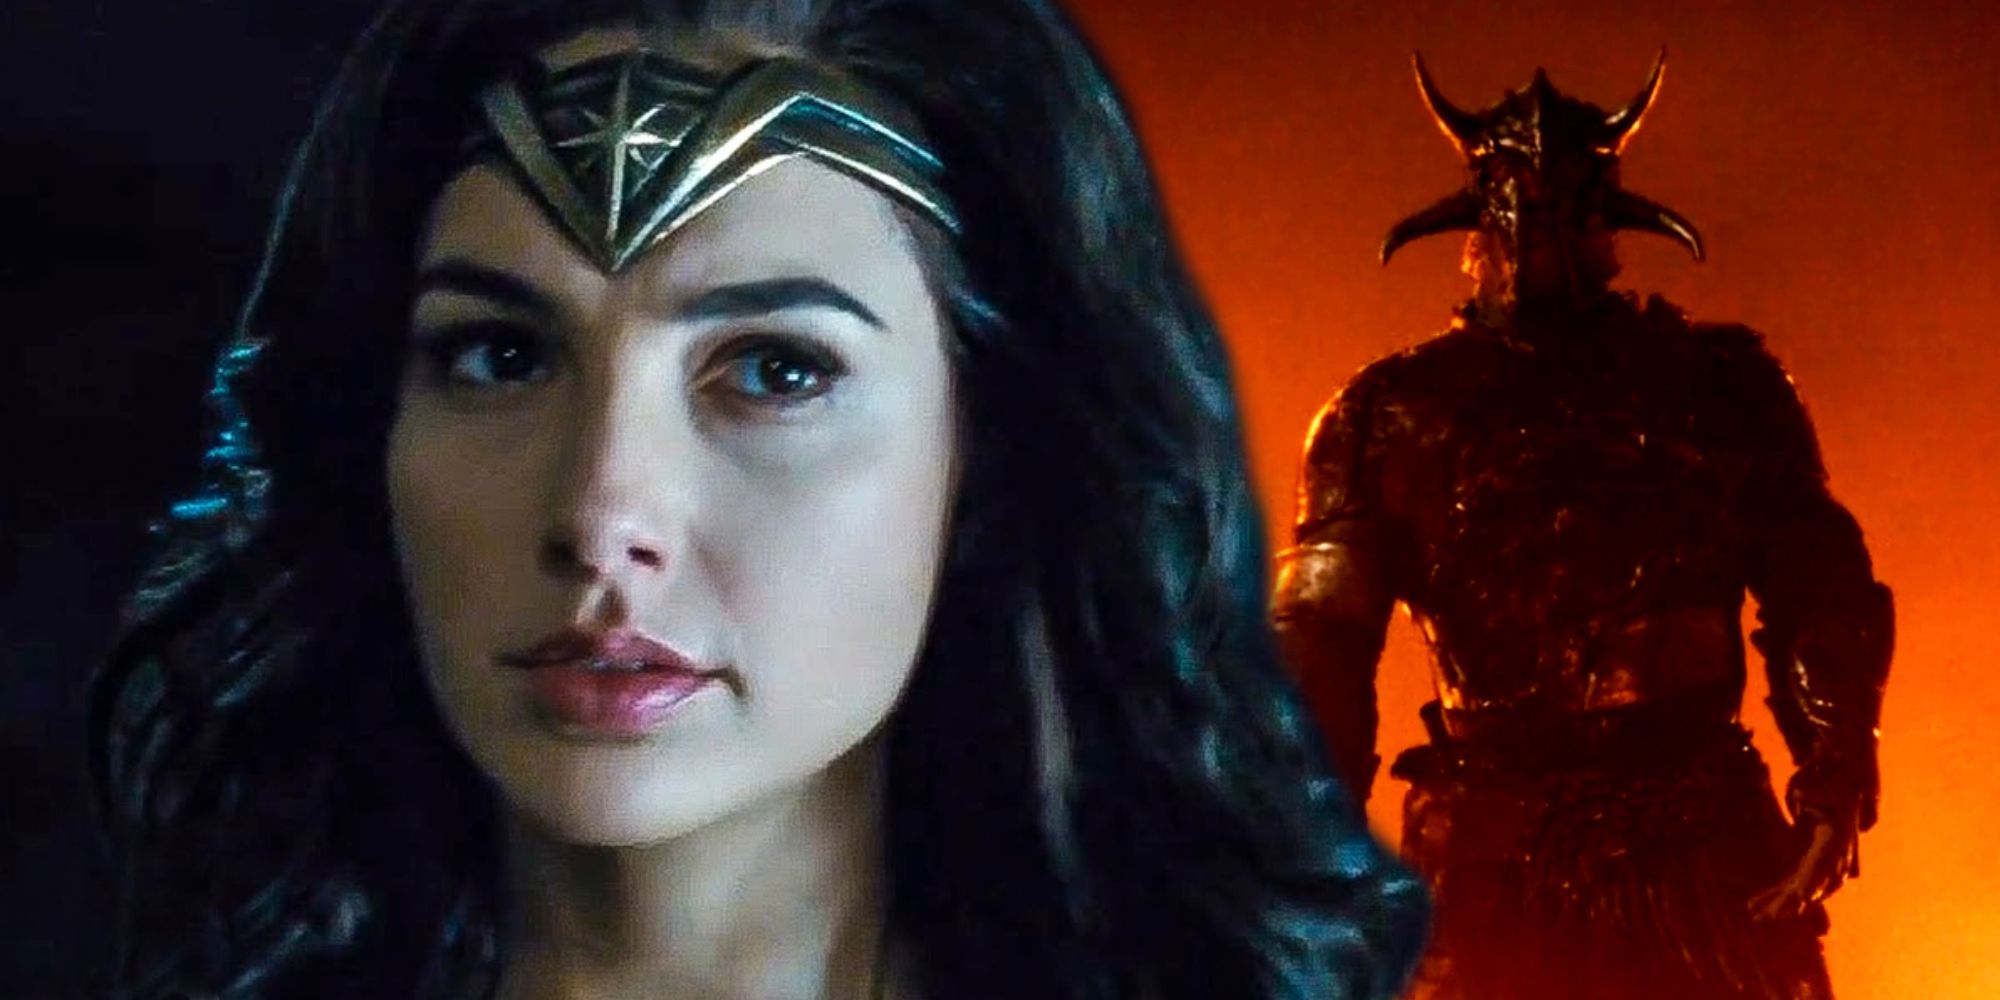 Gal Gadot as Wonder Woman vs Ares in The DCEU